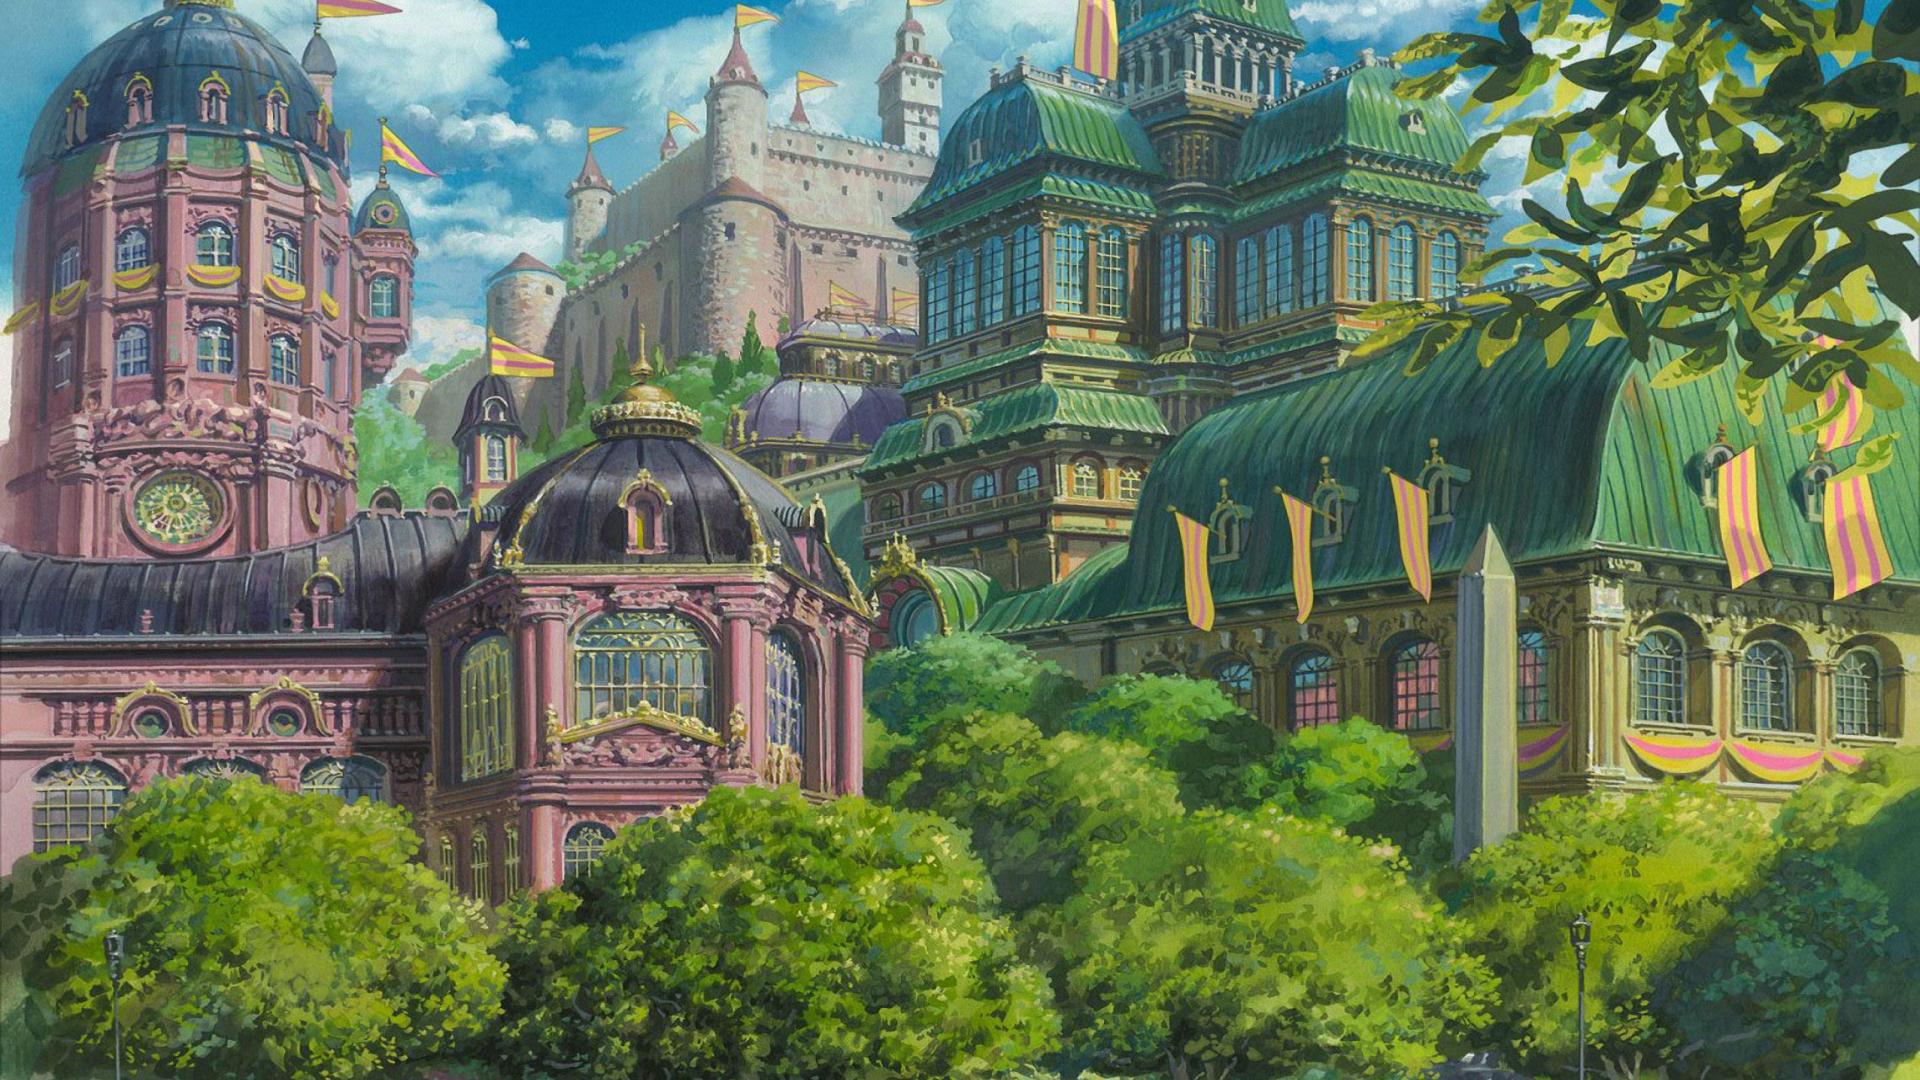 Howl's Moving Castle Laptop Wallpaper Hd hd, picture, image